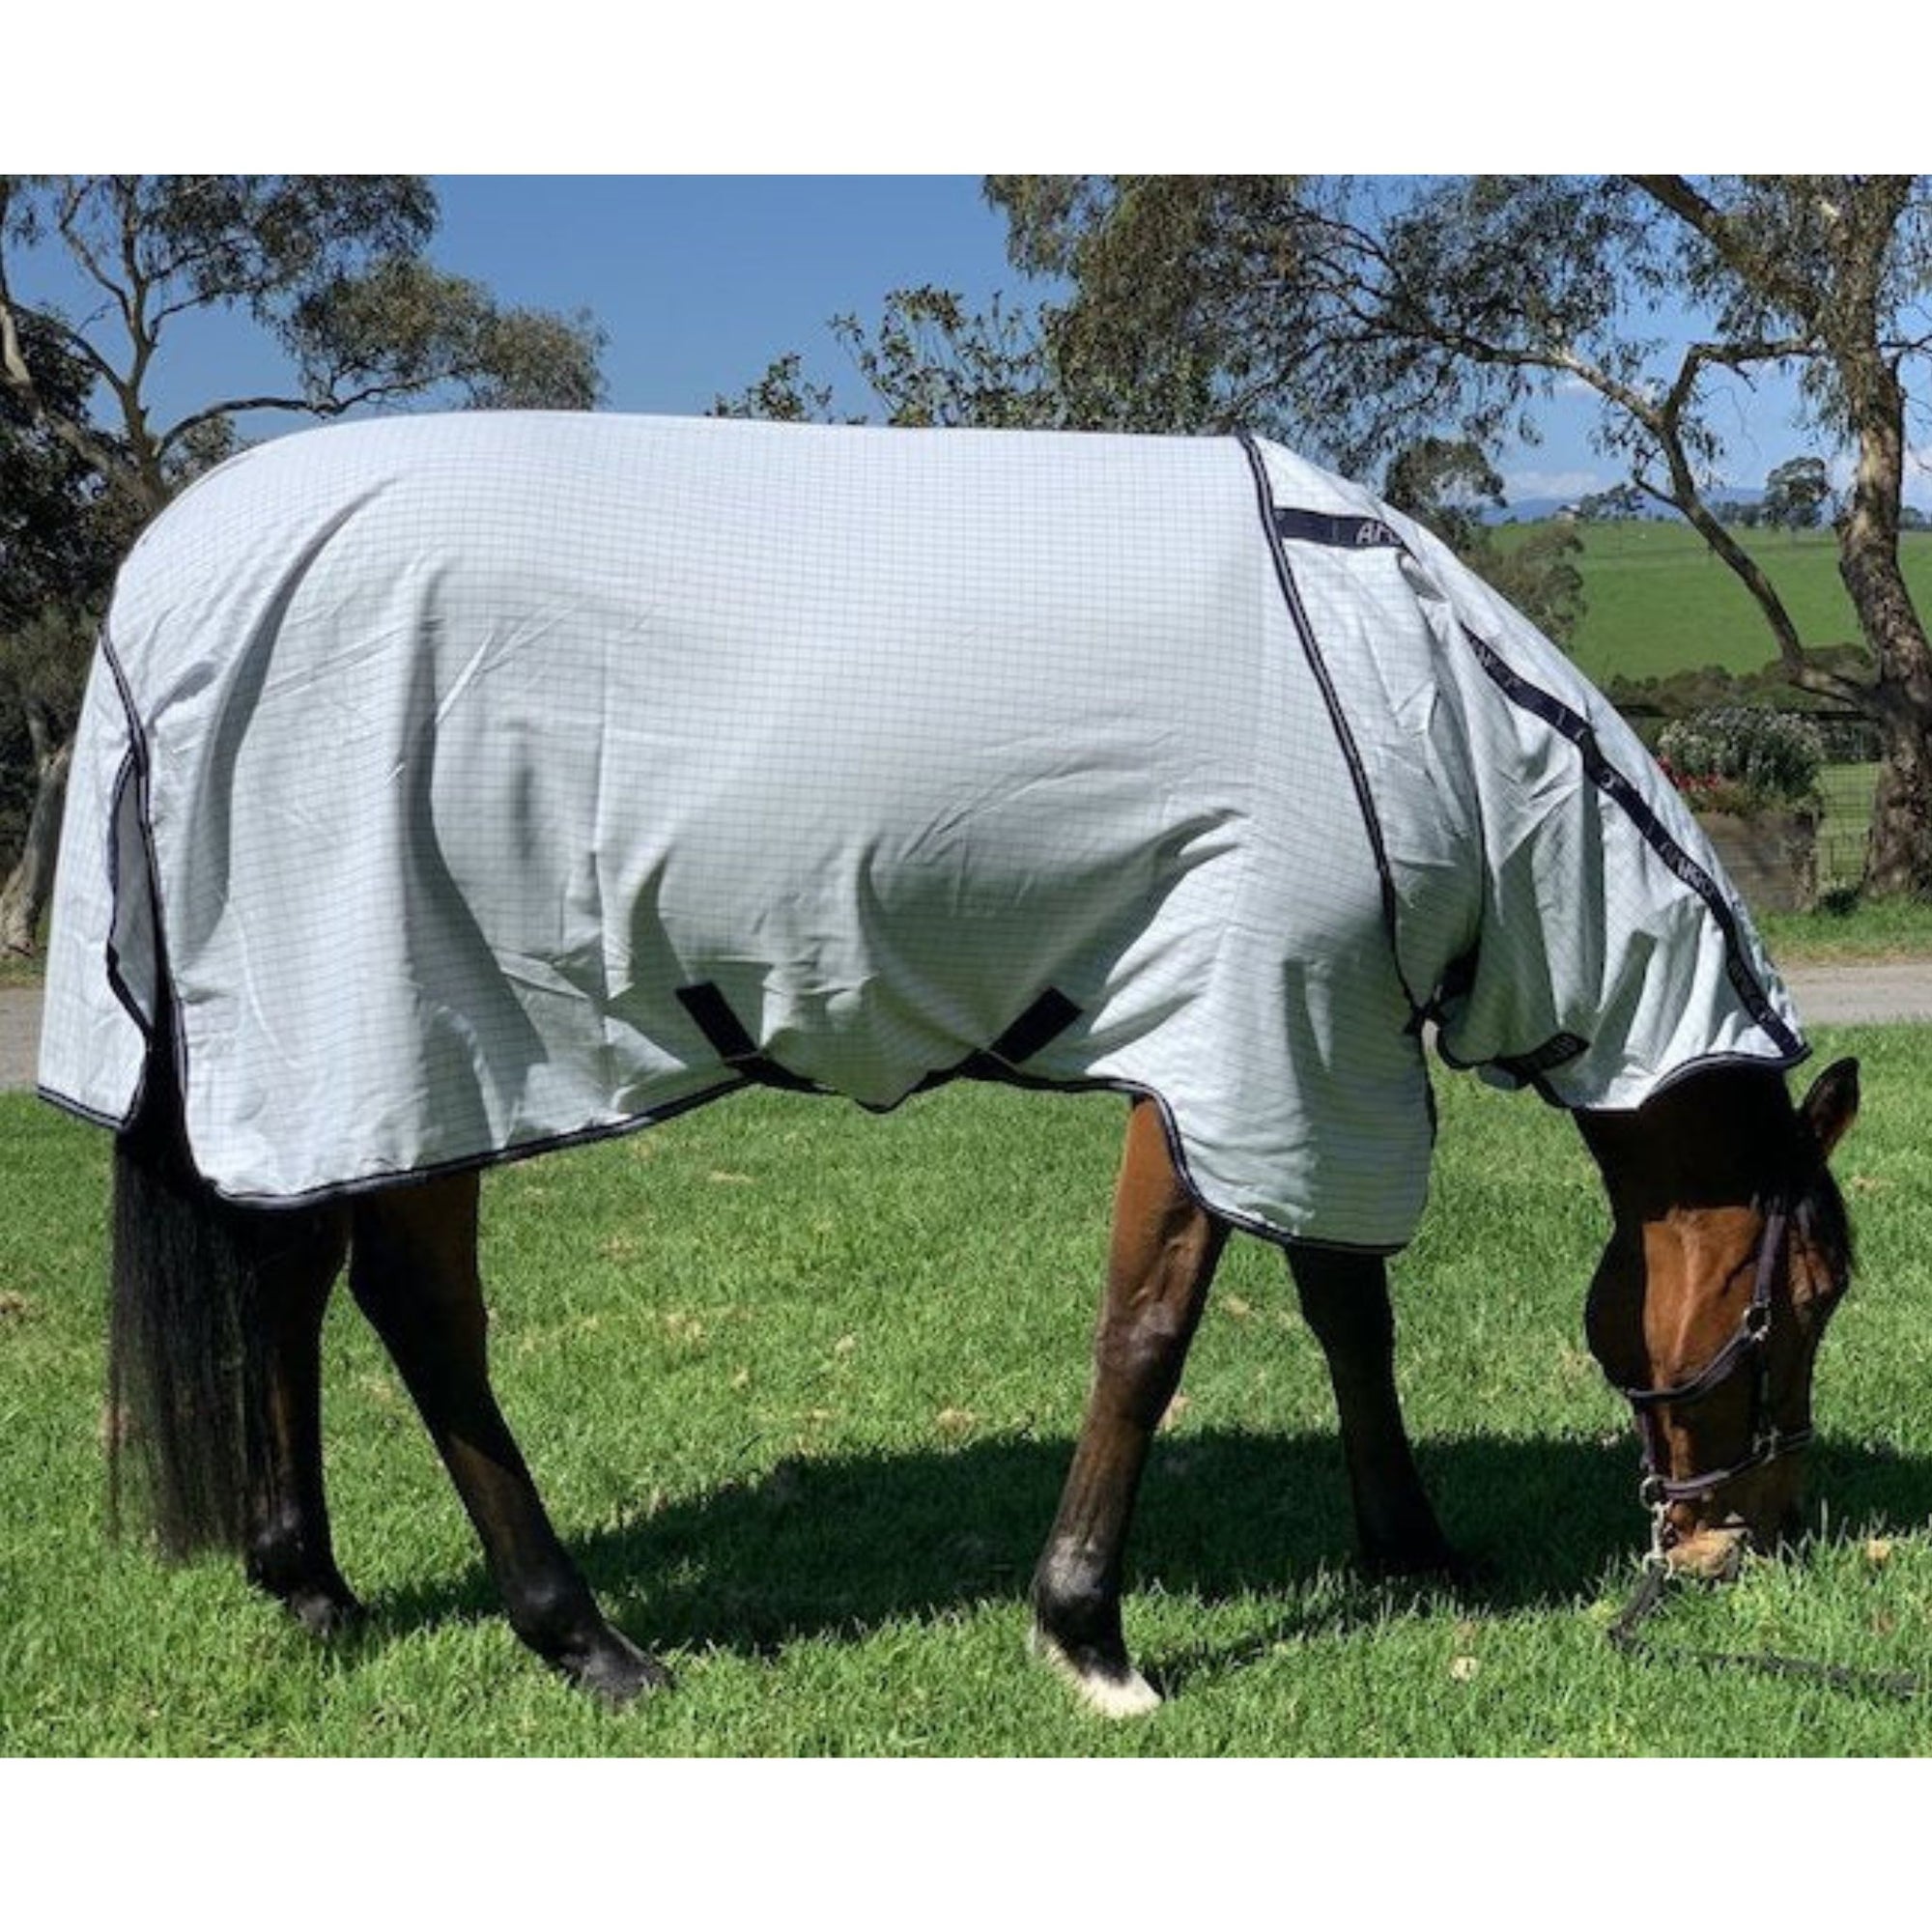 White cotton with navy trim on bay horse.